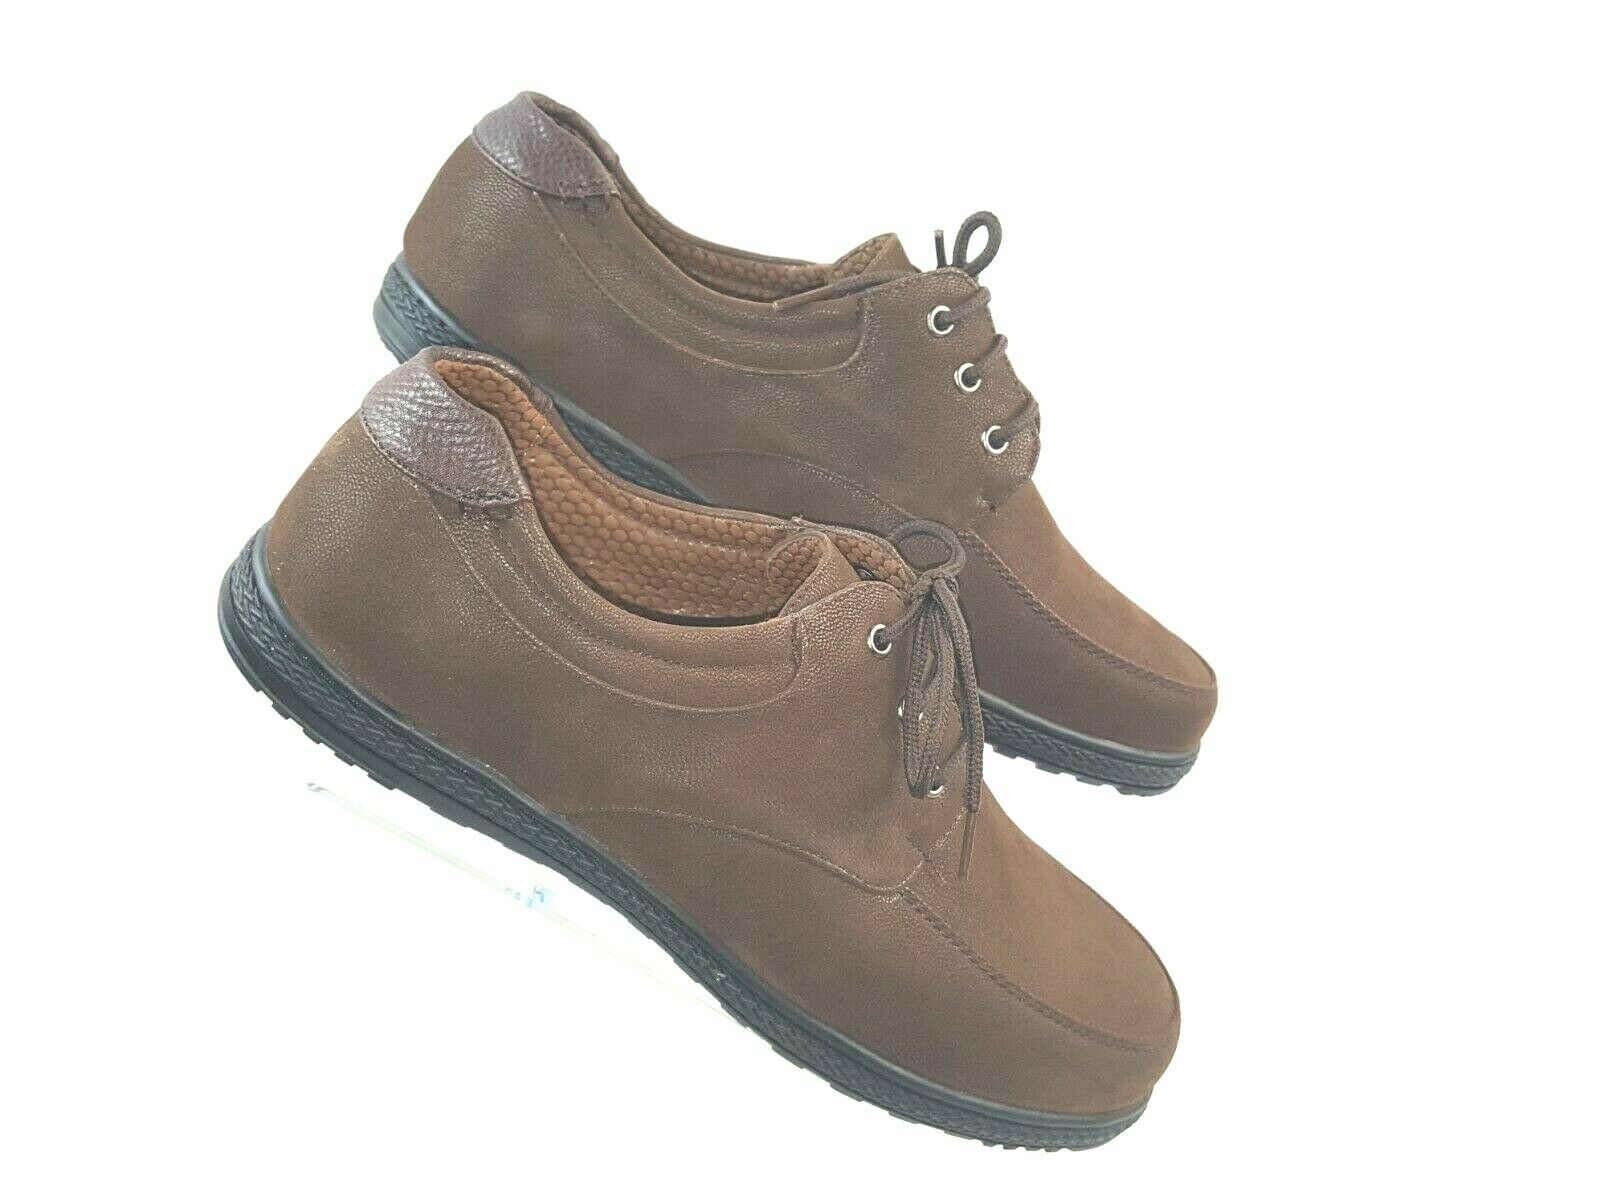 Vikings 50487 Men's Shoes Size 9.5 Brown Lace-Up Casual Shoes